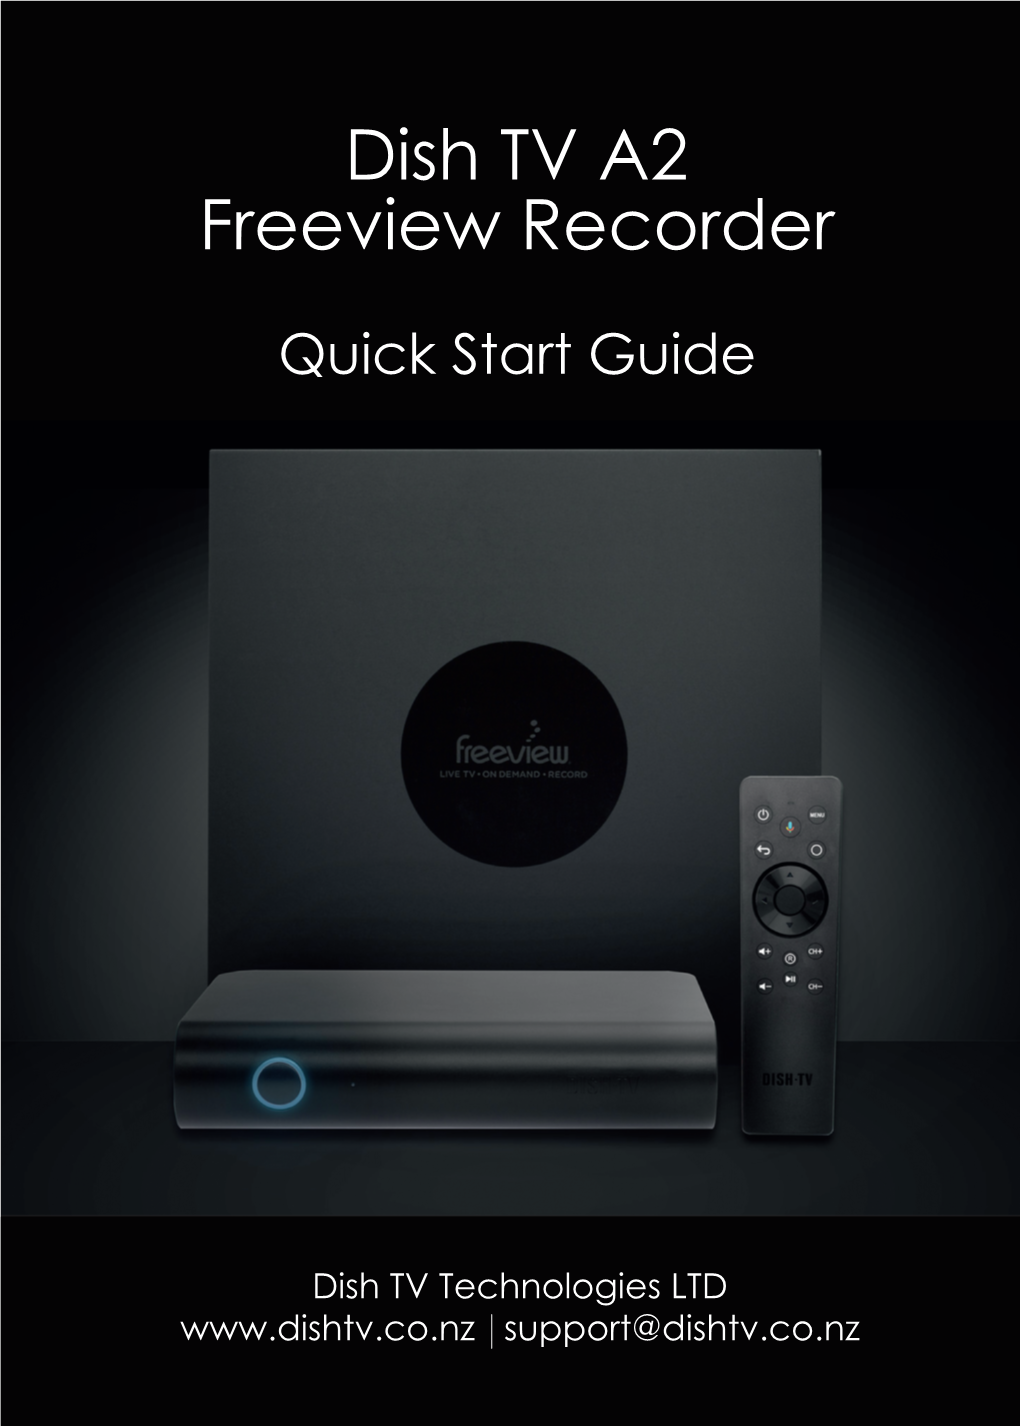 Dish TV A2 Freeview Recorder